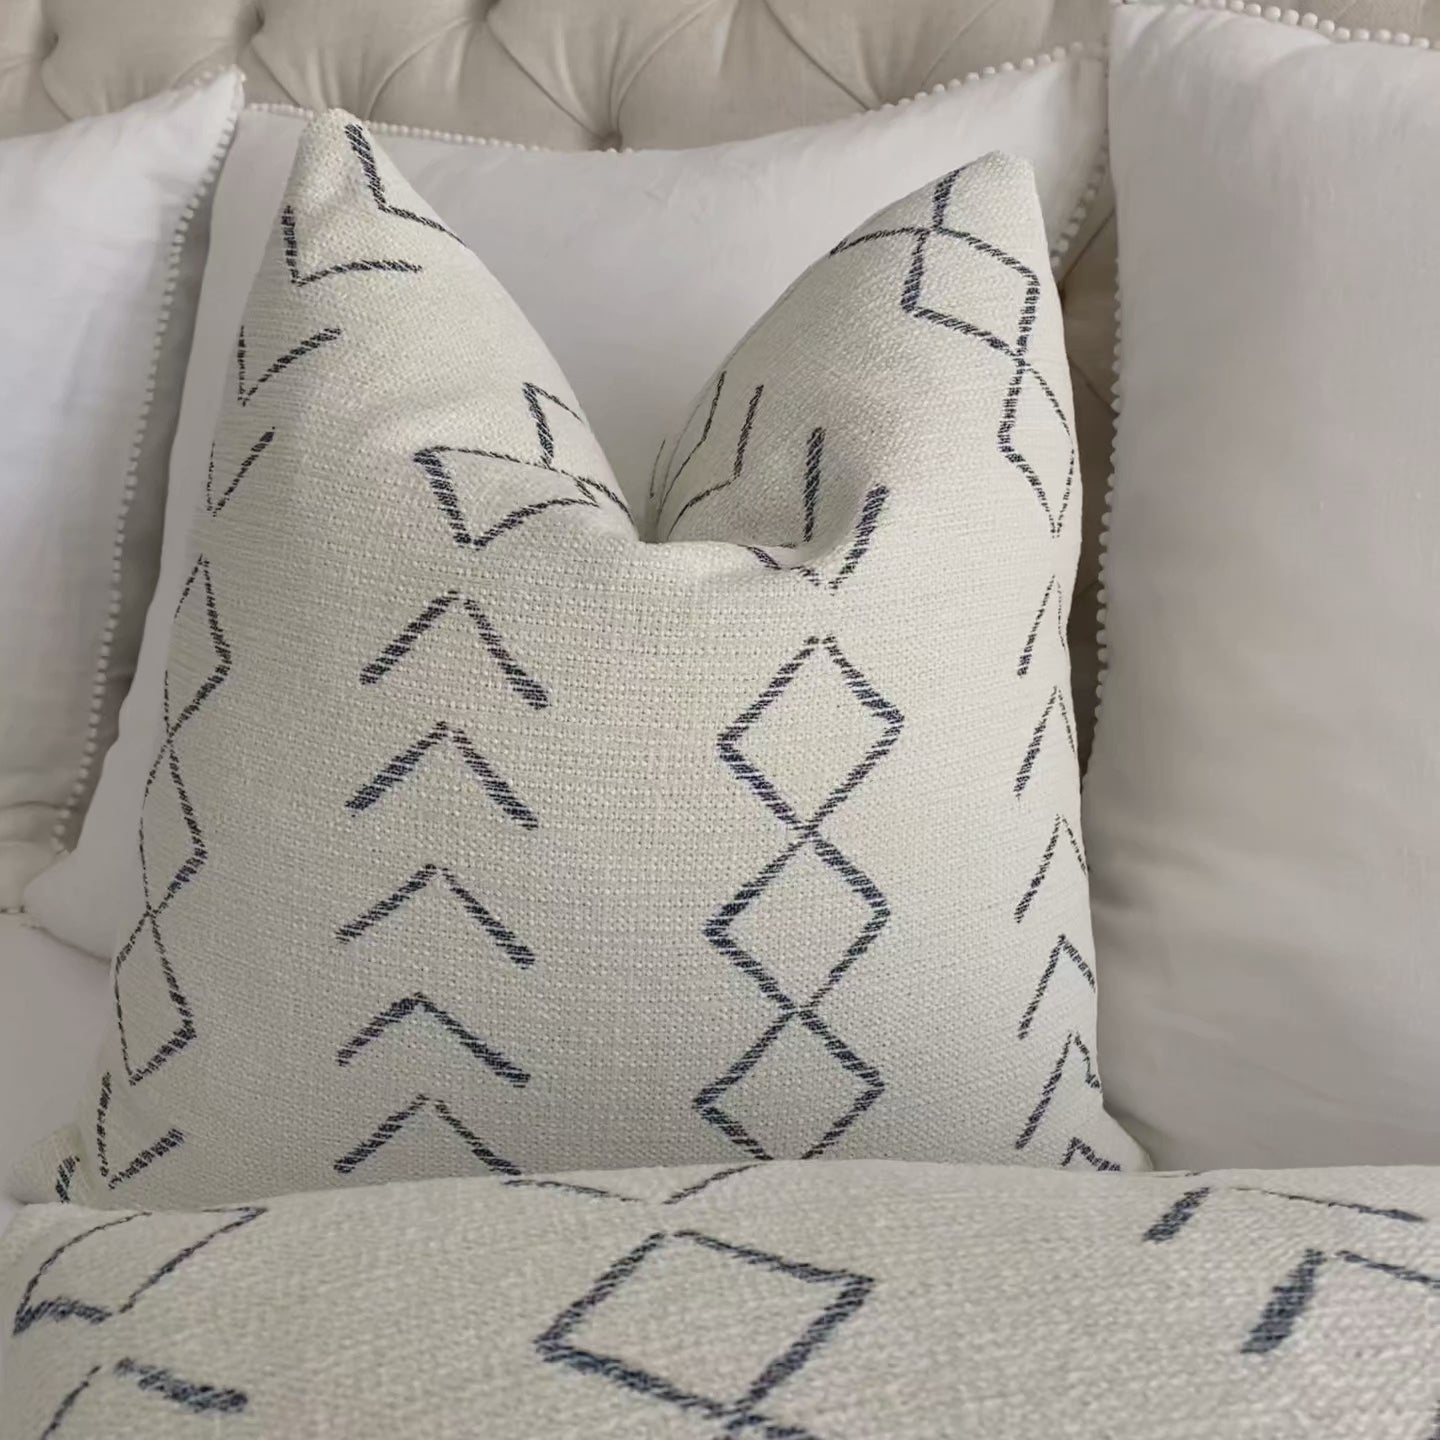 Thibaut Performance Anasazi Midnight Blue Woven Striped Designer Throw Pillow Cover Product Video